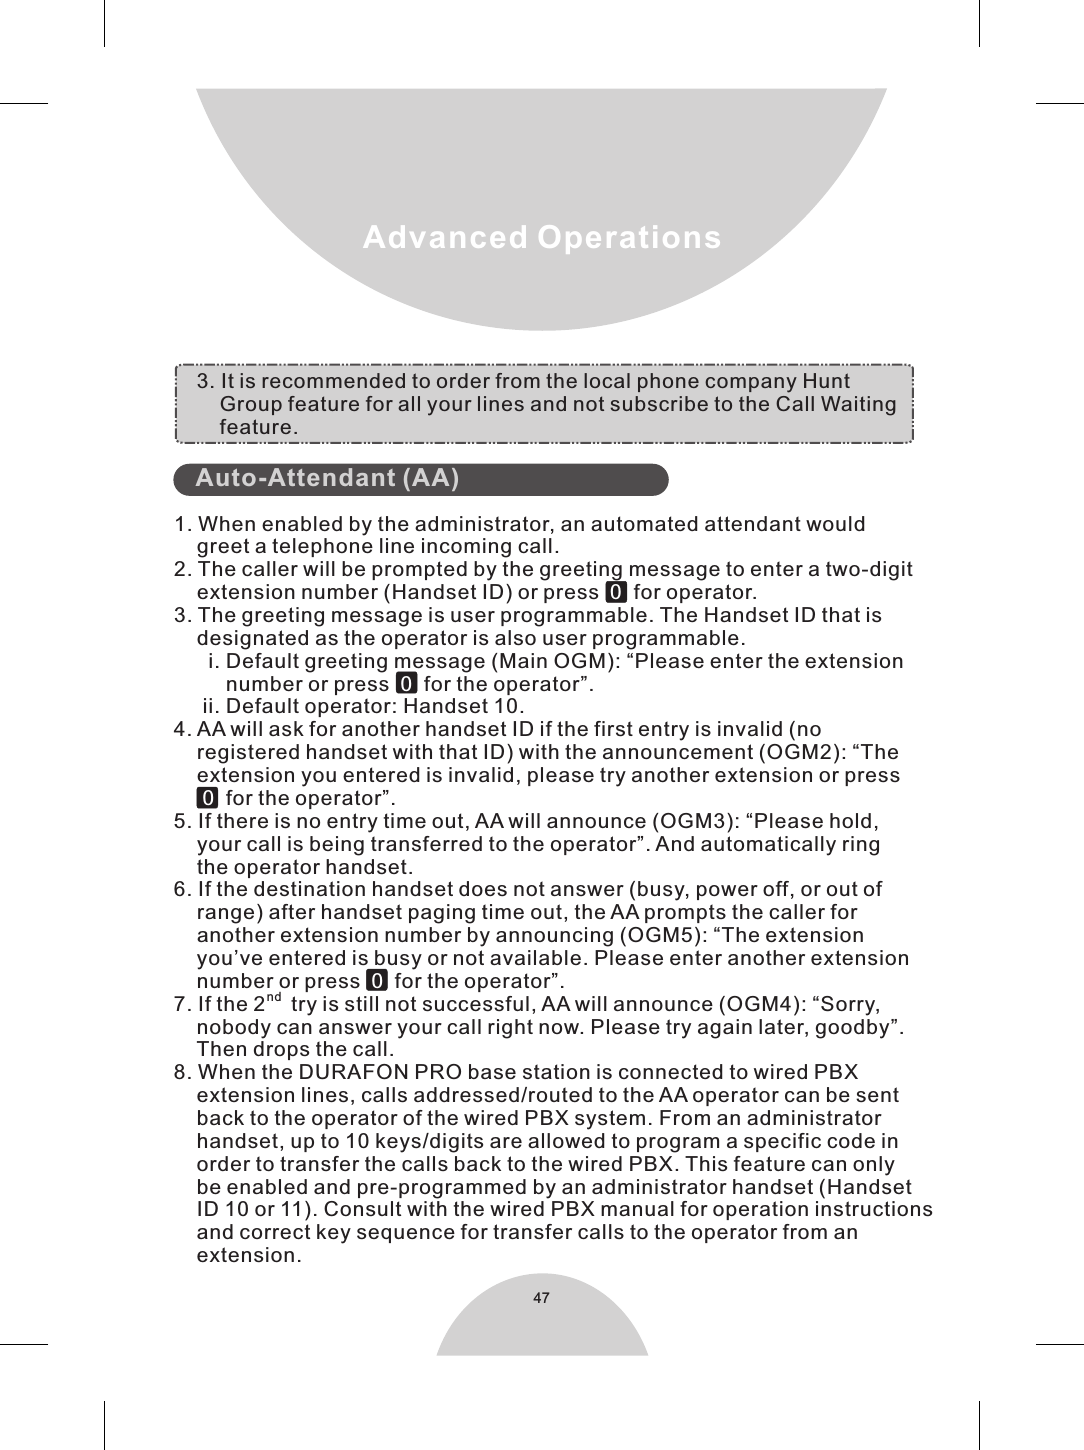 47Advanced Operations1. When enabled by the administrator, an automated attendant would    greet a telephone line incoming call.2. The caller will be prompted by the greeting message to enter a two-digit    extension number (Handset ID) or press     for operator.3. The greeting message is user programmable. The Handset ID that is     designated as the operator is also user programmable.      i. Default greeting message (Main OGM): “Please enter the extension         number or press    for the operator”.     ii. Default operator: Handset 10.4. AA will ask for another handset ID if the first entry is invalid (no     registered handset with that ID) with the announcement (OGM2): “The    extension you entered is invalid, please try another extension or press        for the operator”.5. If there is no entry time out, AA will announce (OGM3): “Please hold,     your call is being transferred to the operator”. And automatically ring     the operator handset.6. If the destination handset does not answer (busy, power off, or out of    range) after handset paging time out, the AA prompts the caller for     another extension number by announcing (OGM5): “The extension     you’ve entered is busy or not available. Please enter another extension     number or press   for the operator”.nd7. If the 2   try is still not successful, AA will announce (OGM4): “Sorry,    nobody can answer your call right now. Please try again later, goodby”.    Then drops the call.8. When the DURAFON PRO base station is connected to wired PBX     extension lines, calls addressed/routed to the AA operator can be sent    back to the operator of the wired PBX system. From an administrator    handset, up to 10 keys/digits are allowed to program a specific code in     order to transfer the calls back to the wired PBX. This feature can only    be enabled and pre-programmed by an administrator handset (Handset    ID 10 or 11). Consult with the wired PBX manual for operation instructions    and correct key sequence for transfer calls to the operator from an     extension.             00 00      Auto-Attendant (AA)            3. It is recommended to order from the local phone company Hunt         Group feature for all your lines and not subscribe to the Call Waiting          feature. 